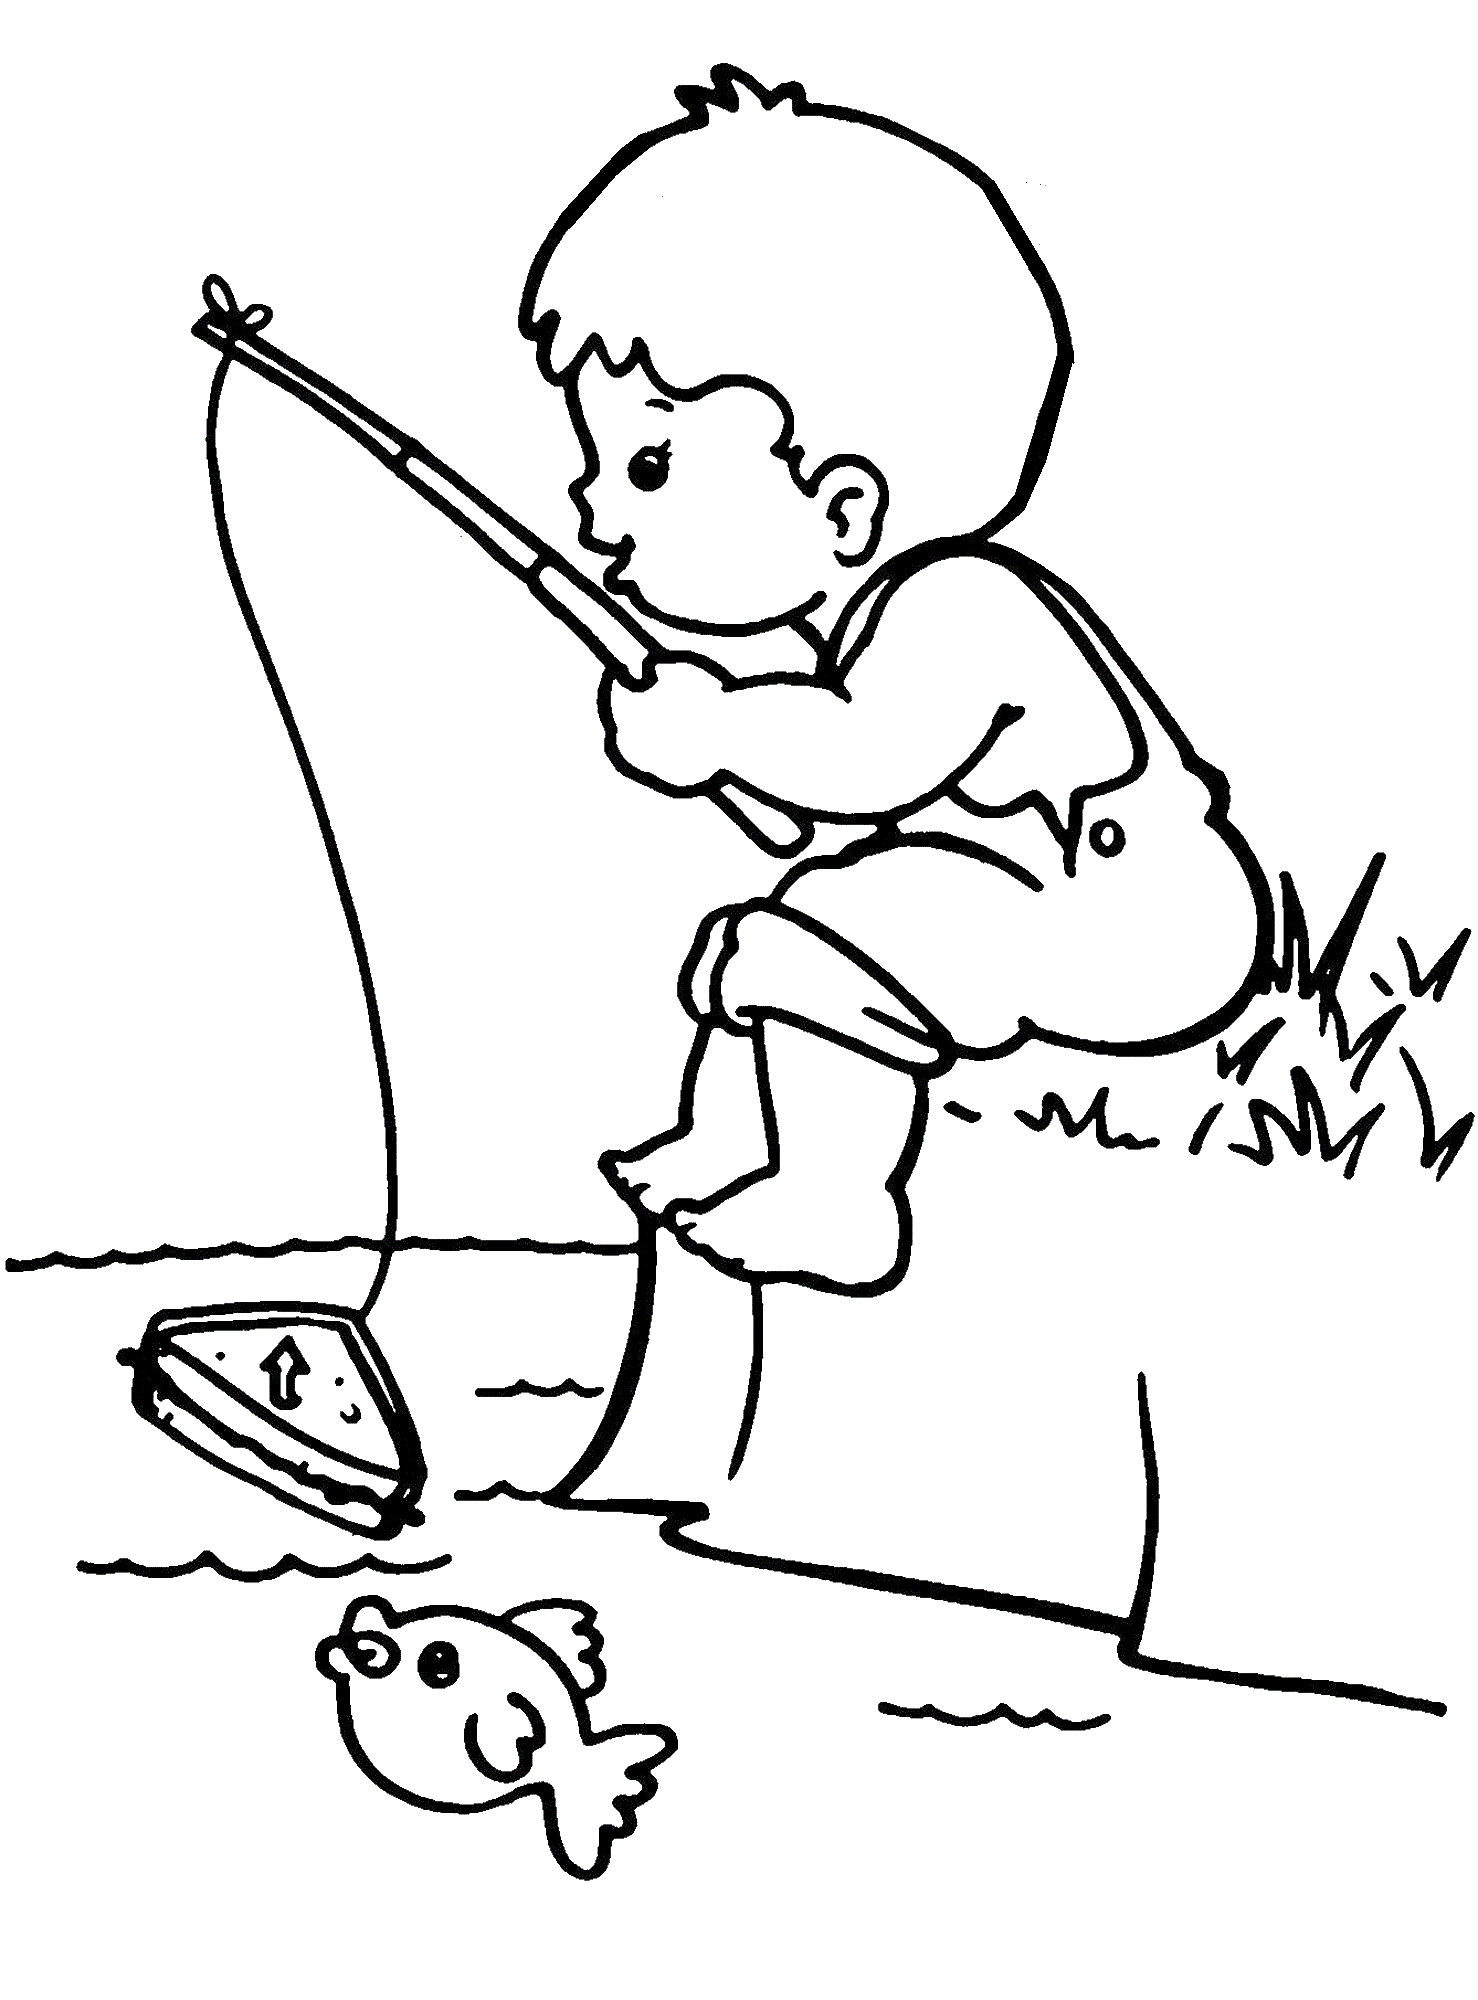 Fishing Coloring Pages for boys Little Boy Fishing Printable 2020 0372 Coloring4free